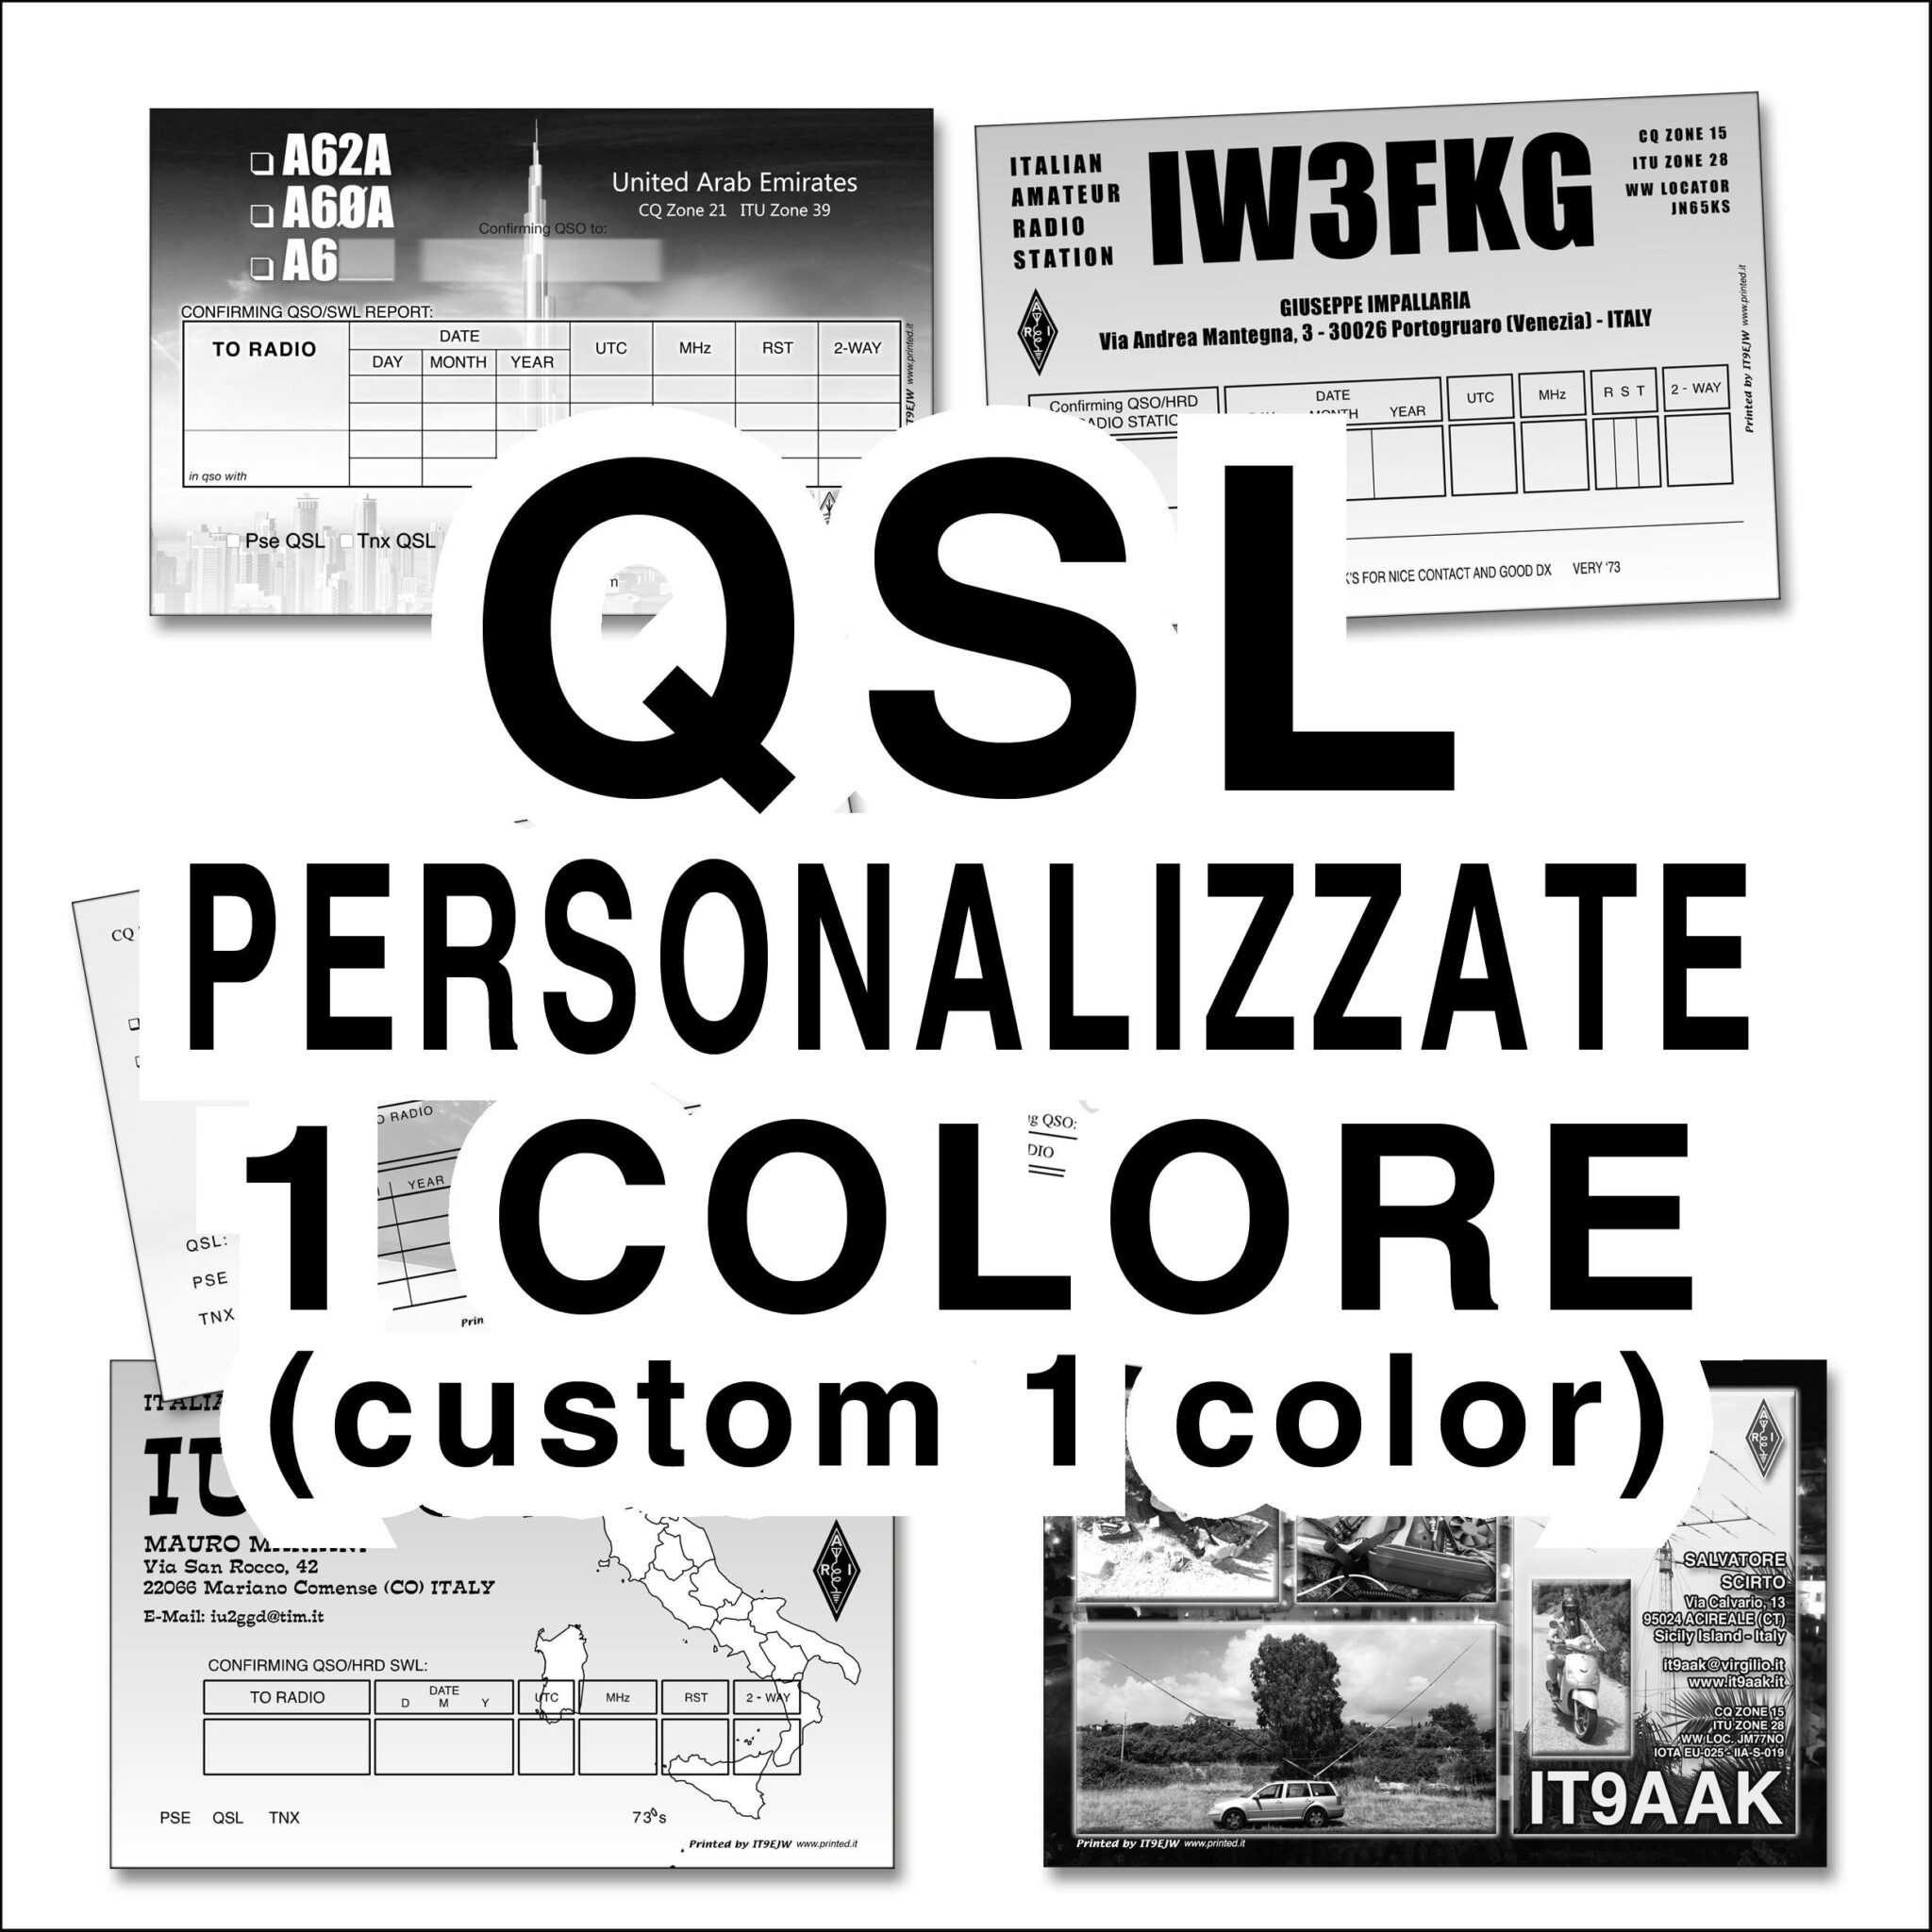 Qsl Cards From Excel Spreadsheet Regarding Qsl Card Template